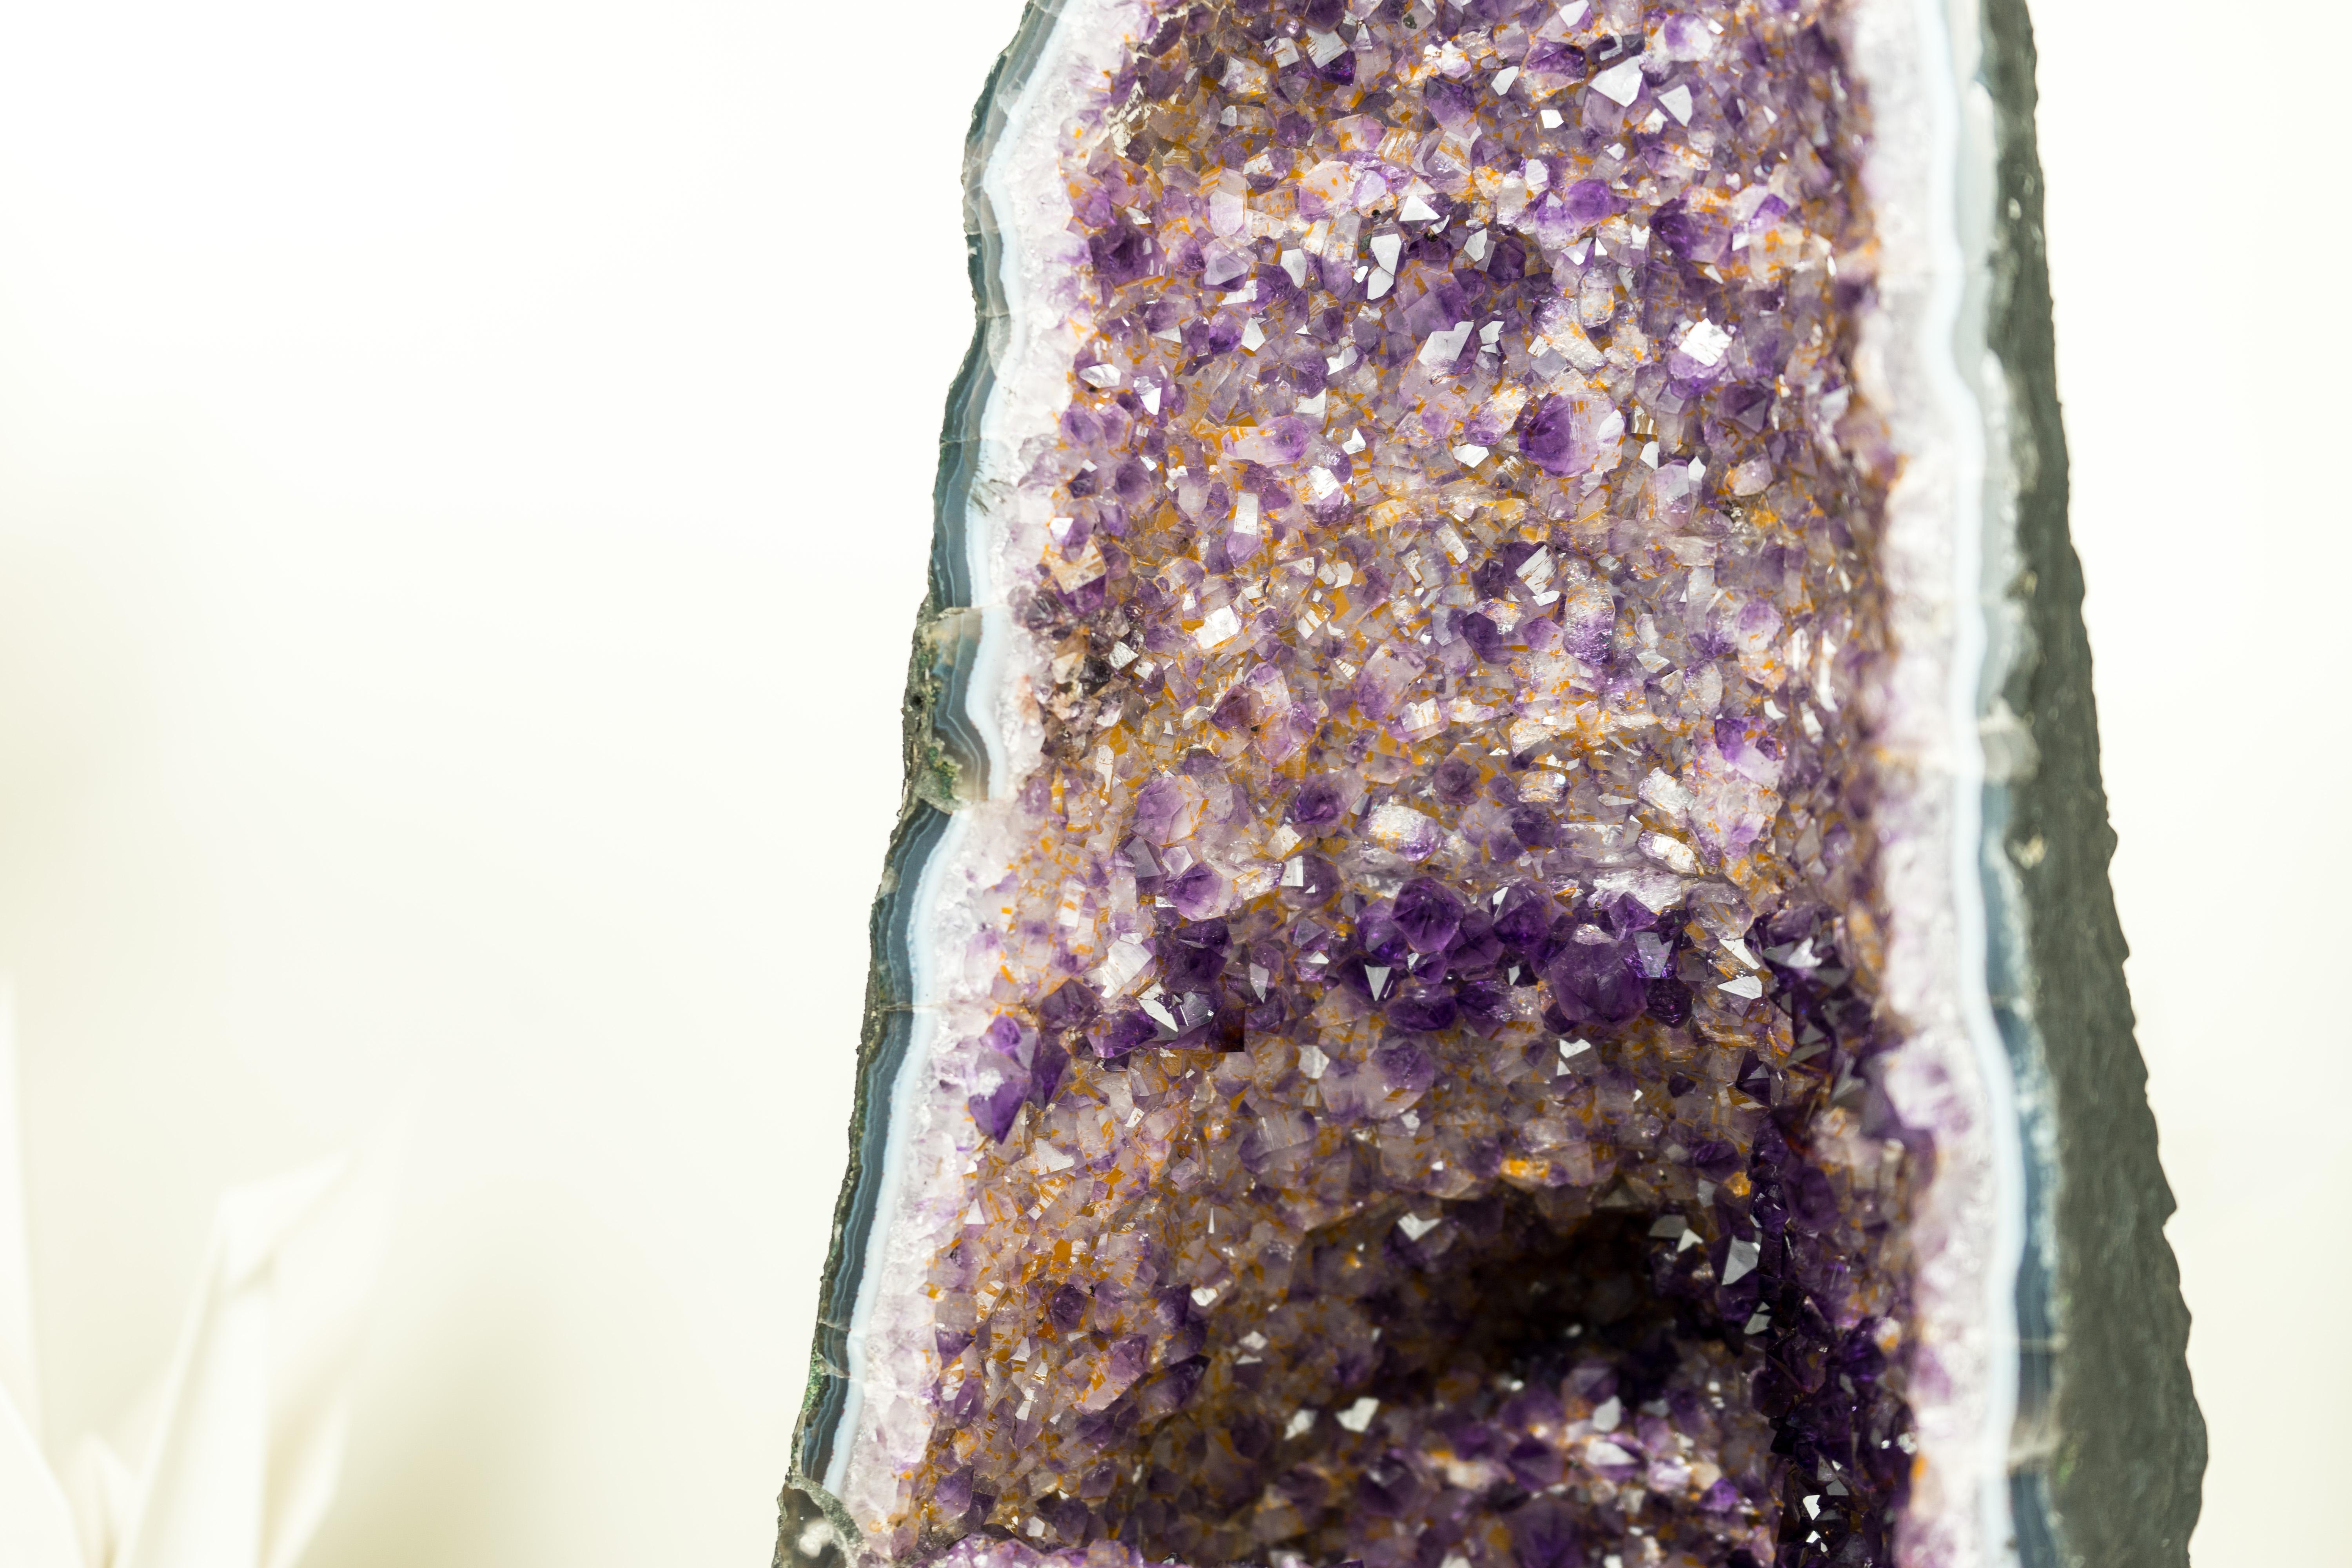 An extraordinary Amethyst Geode that showcases a superb formation with two distinct colors, this geode showcases a blend of deep purple Amethyst lines that intricately interlace with lines of lavender Amethyst, creating a unique and rarely seen mix